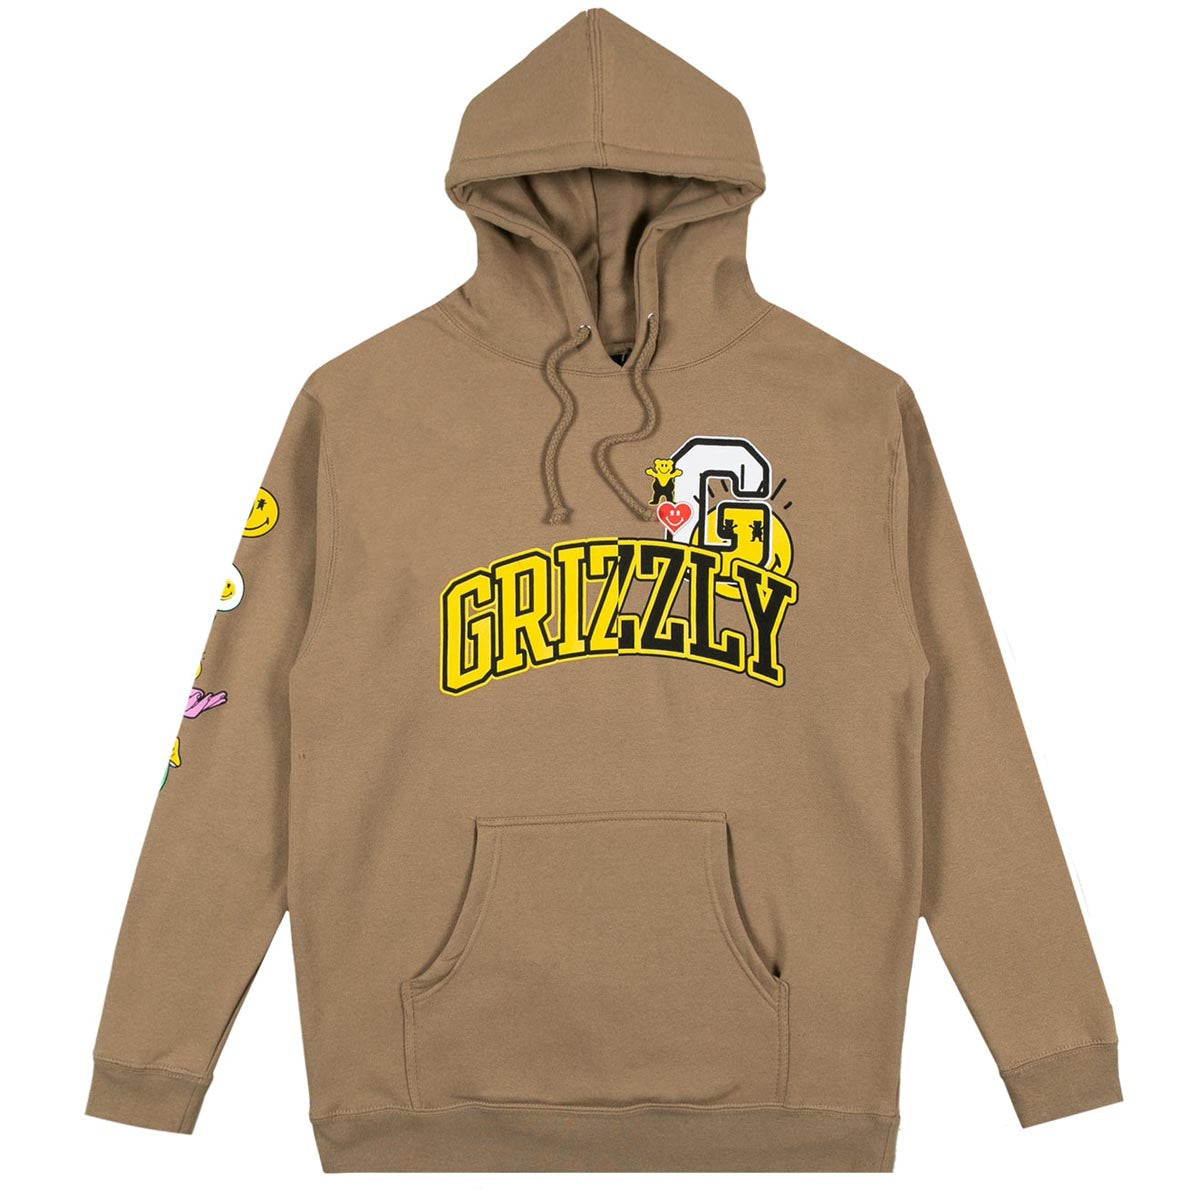 Grizzly x Smiley World Hoodie - Tan image 1